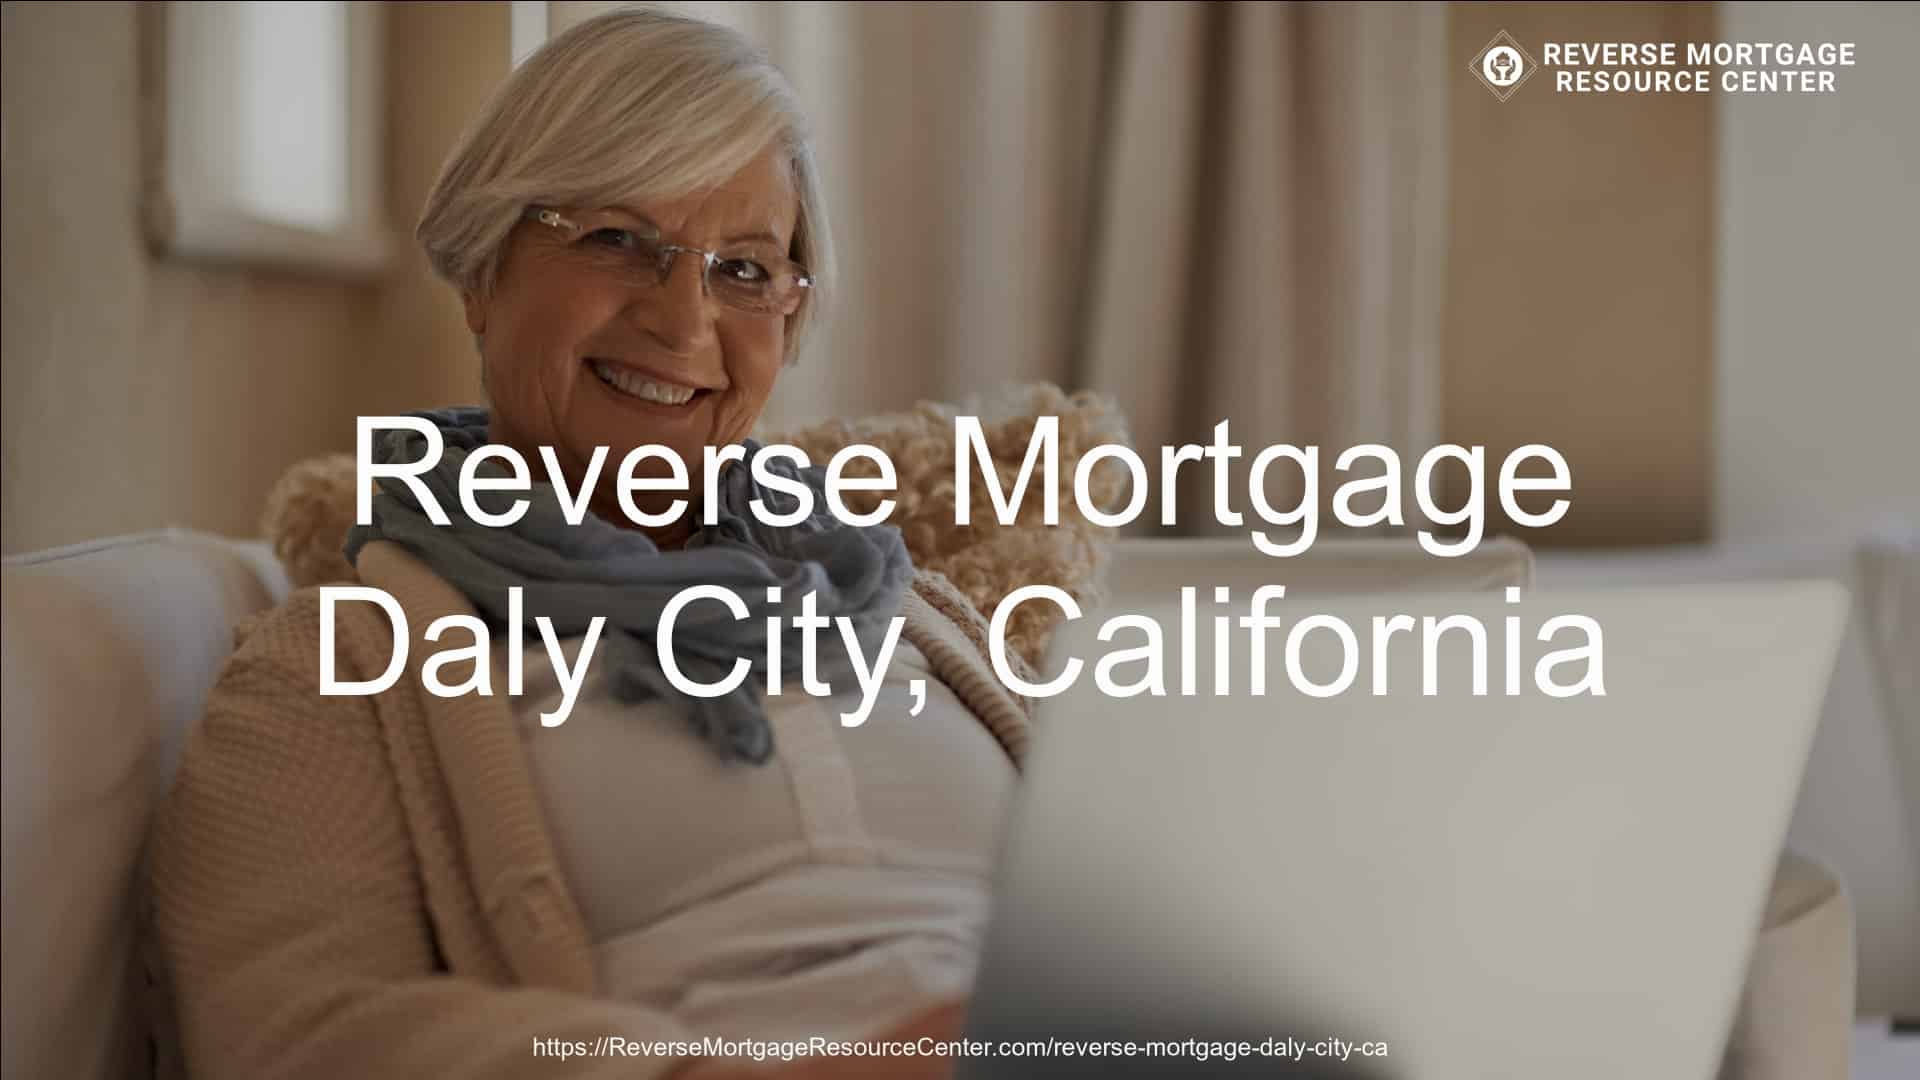 Reverse Mortgage in Daly City, CA